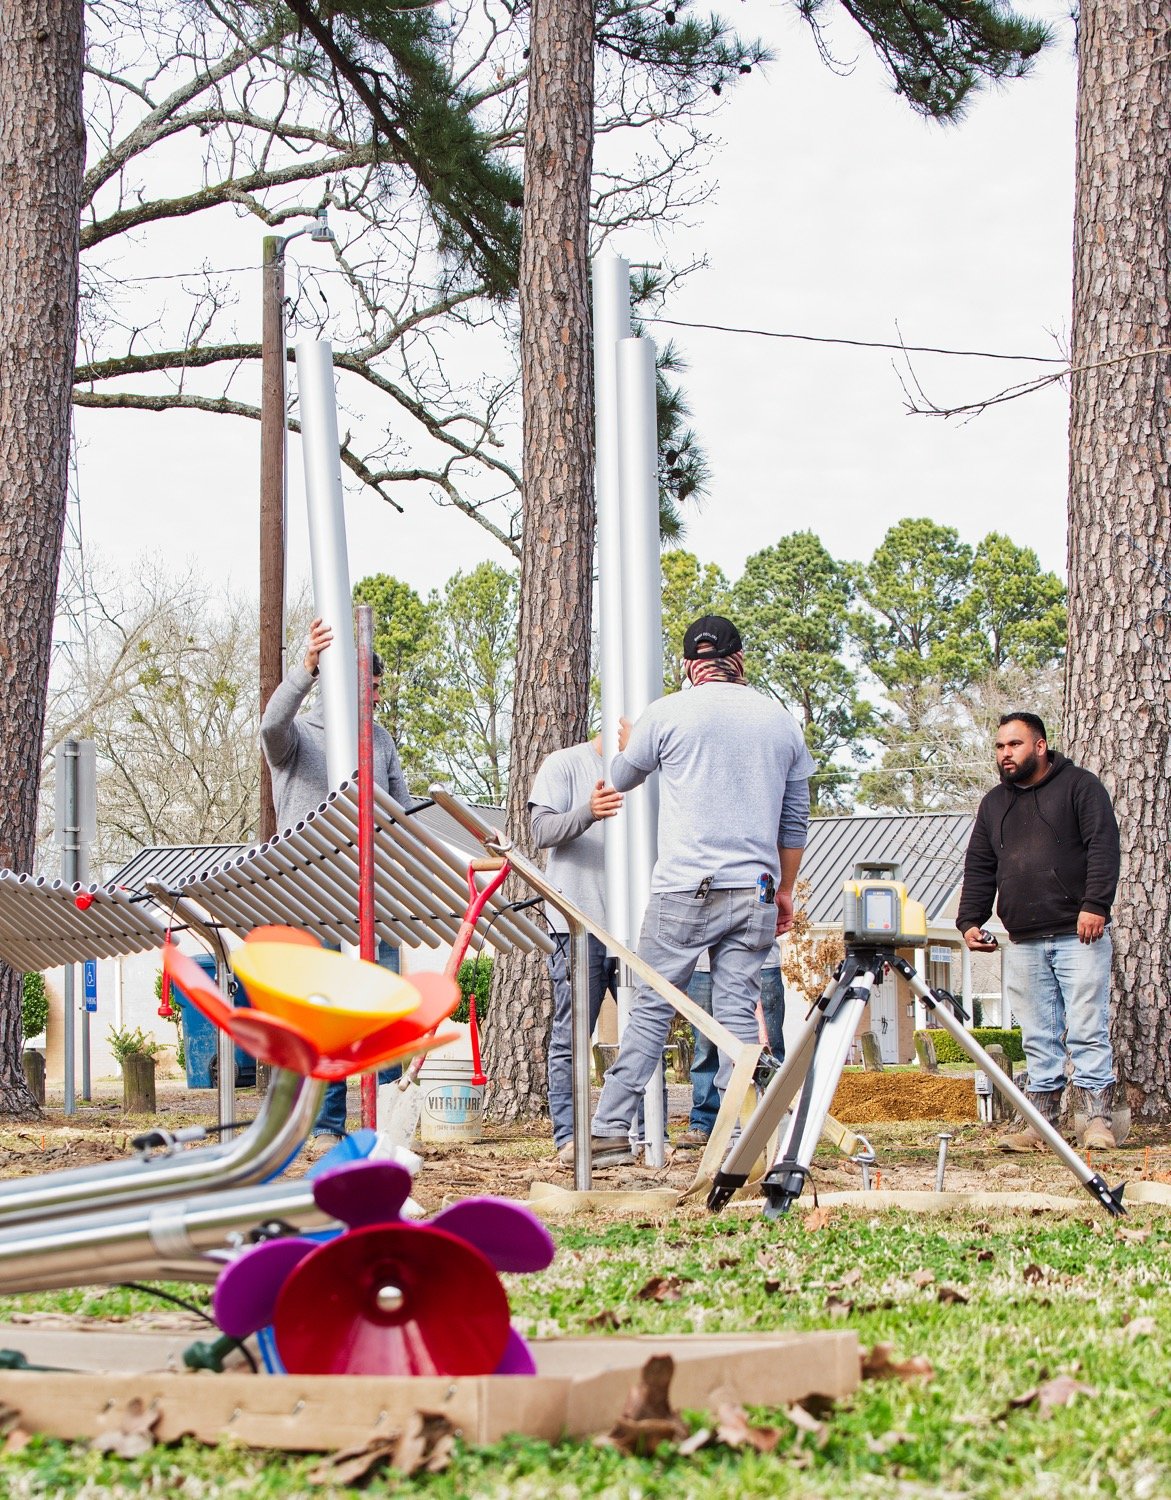 Workers install chimes in the Jim Hogg City Park in Quitman as part of the new play installation featuring a variety of musical instruments.